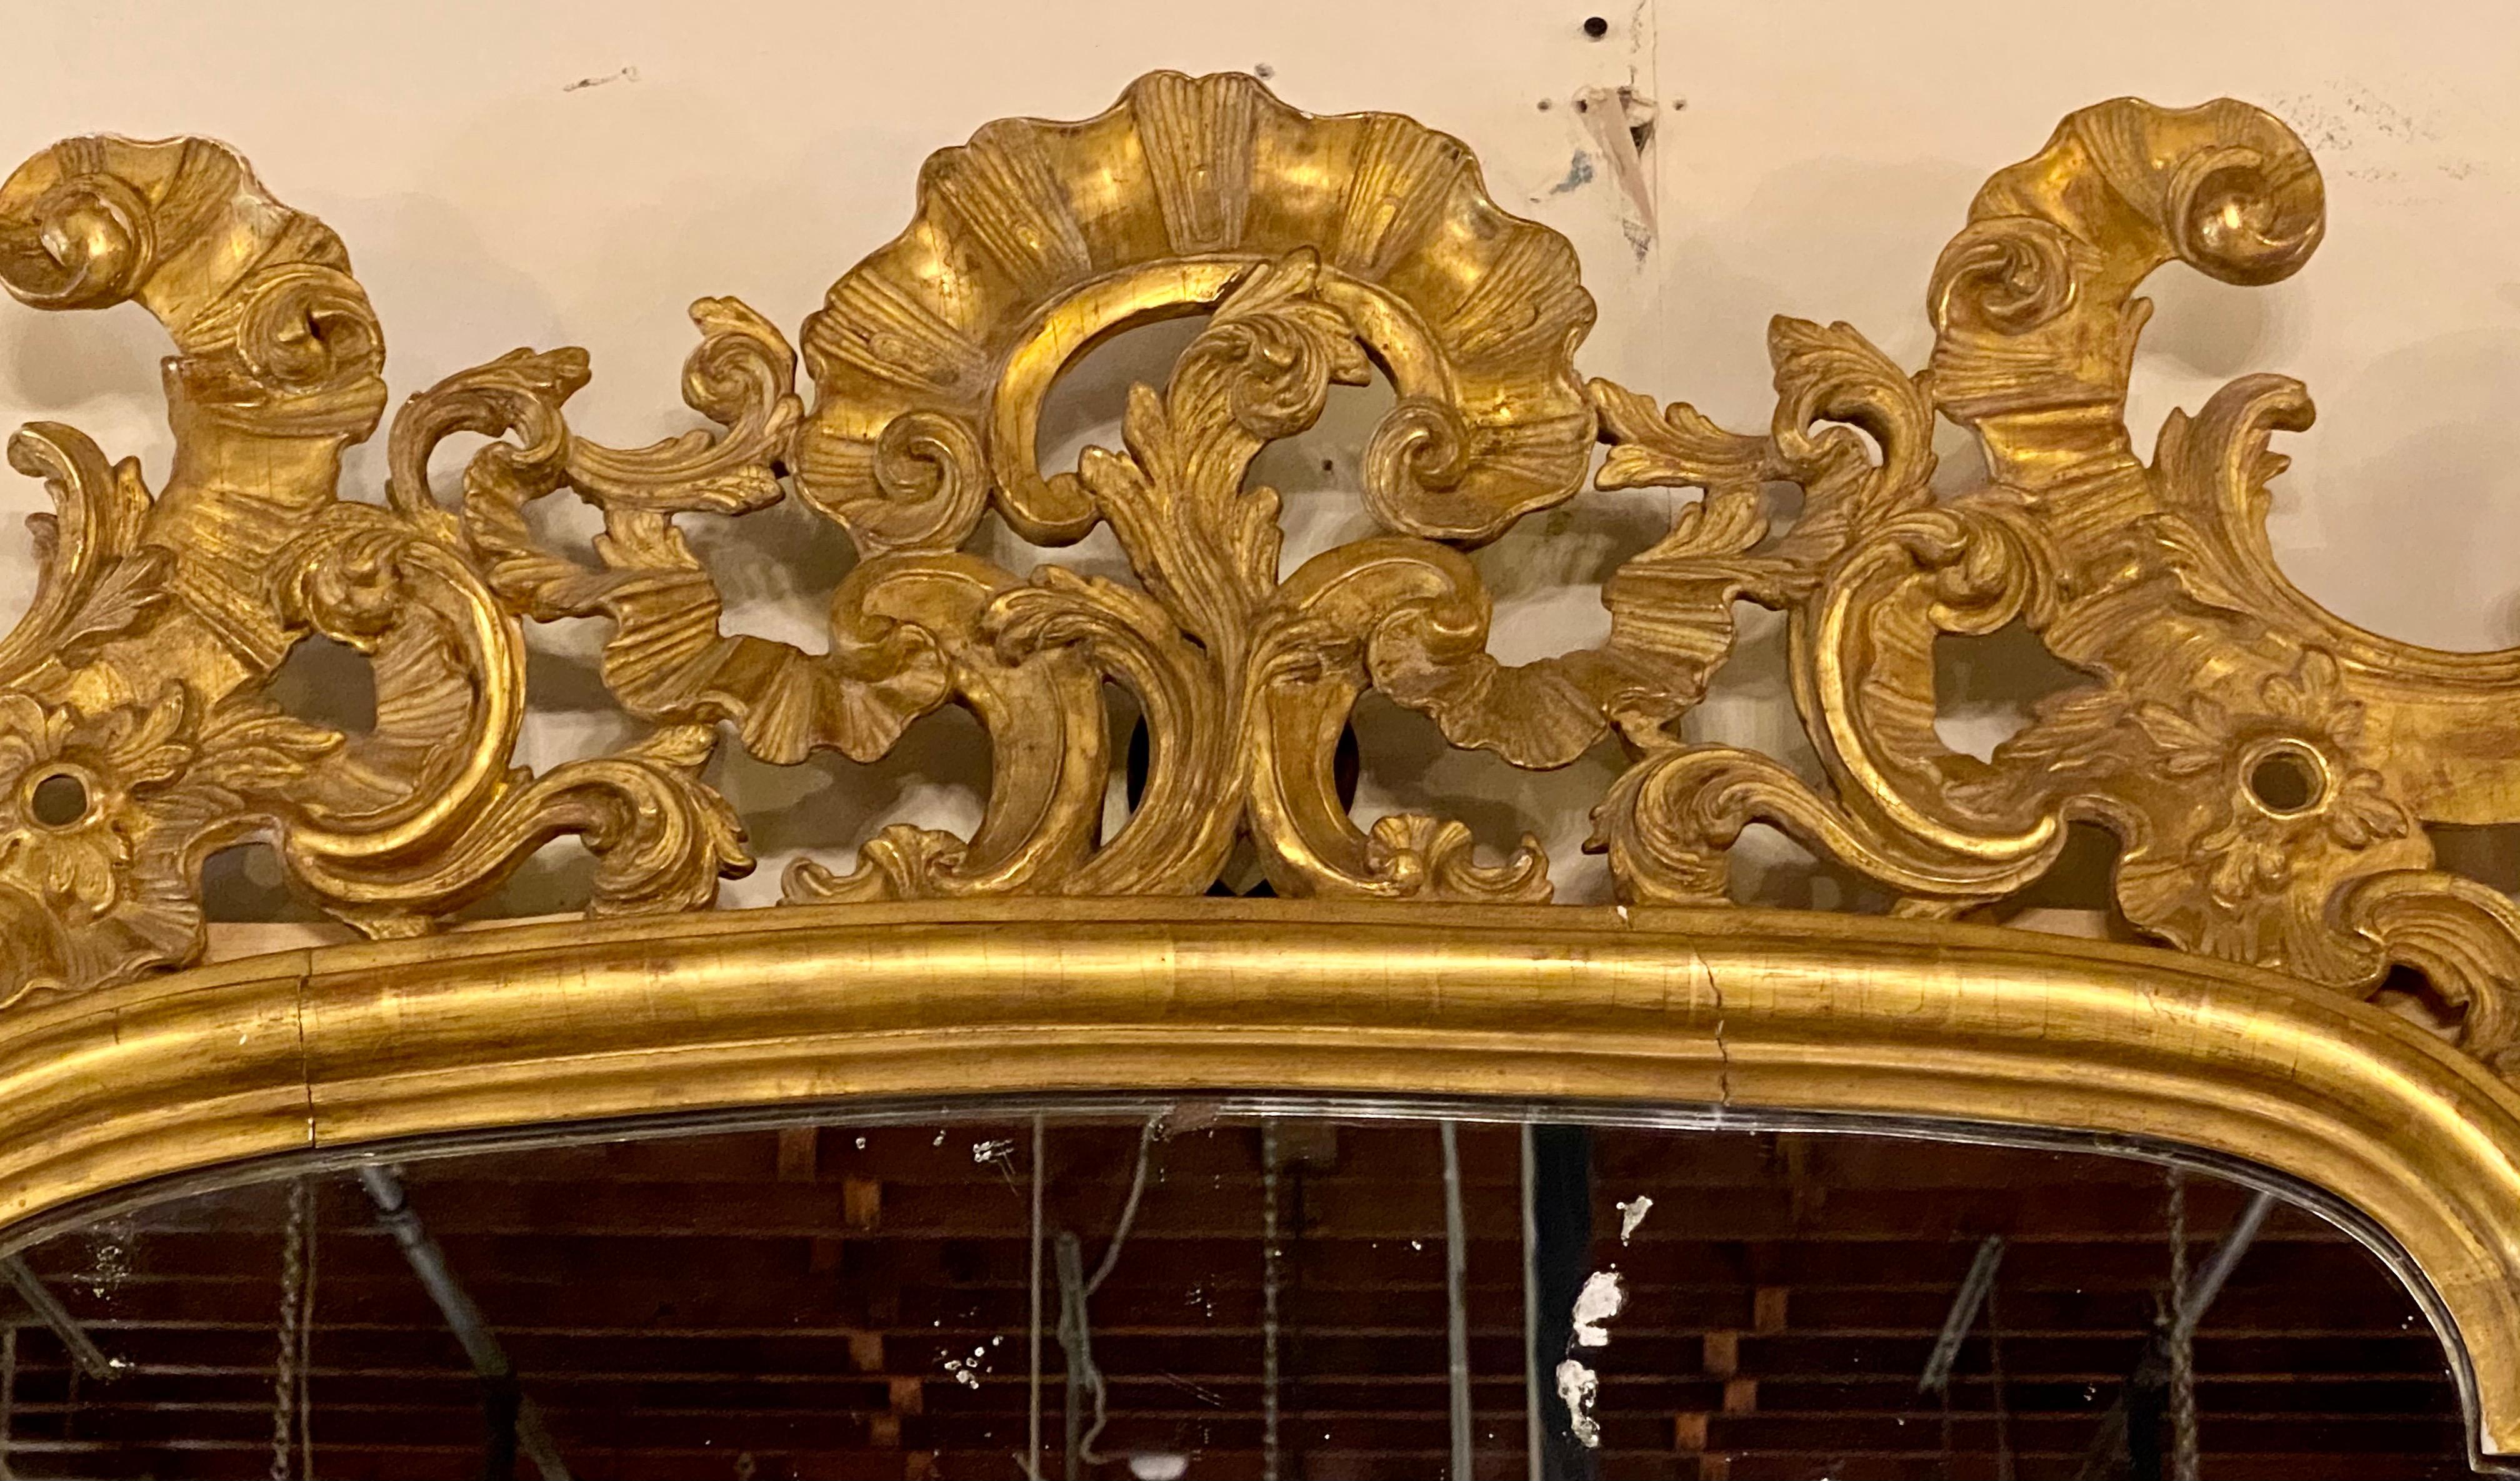 French 18th Century-Early 19th Century Giltwood Mirror, over the Mantle Wall or Console